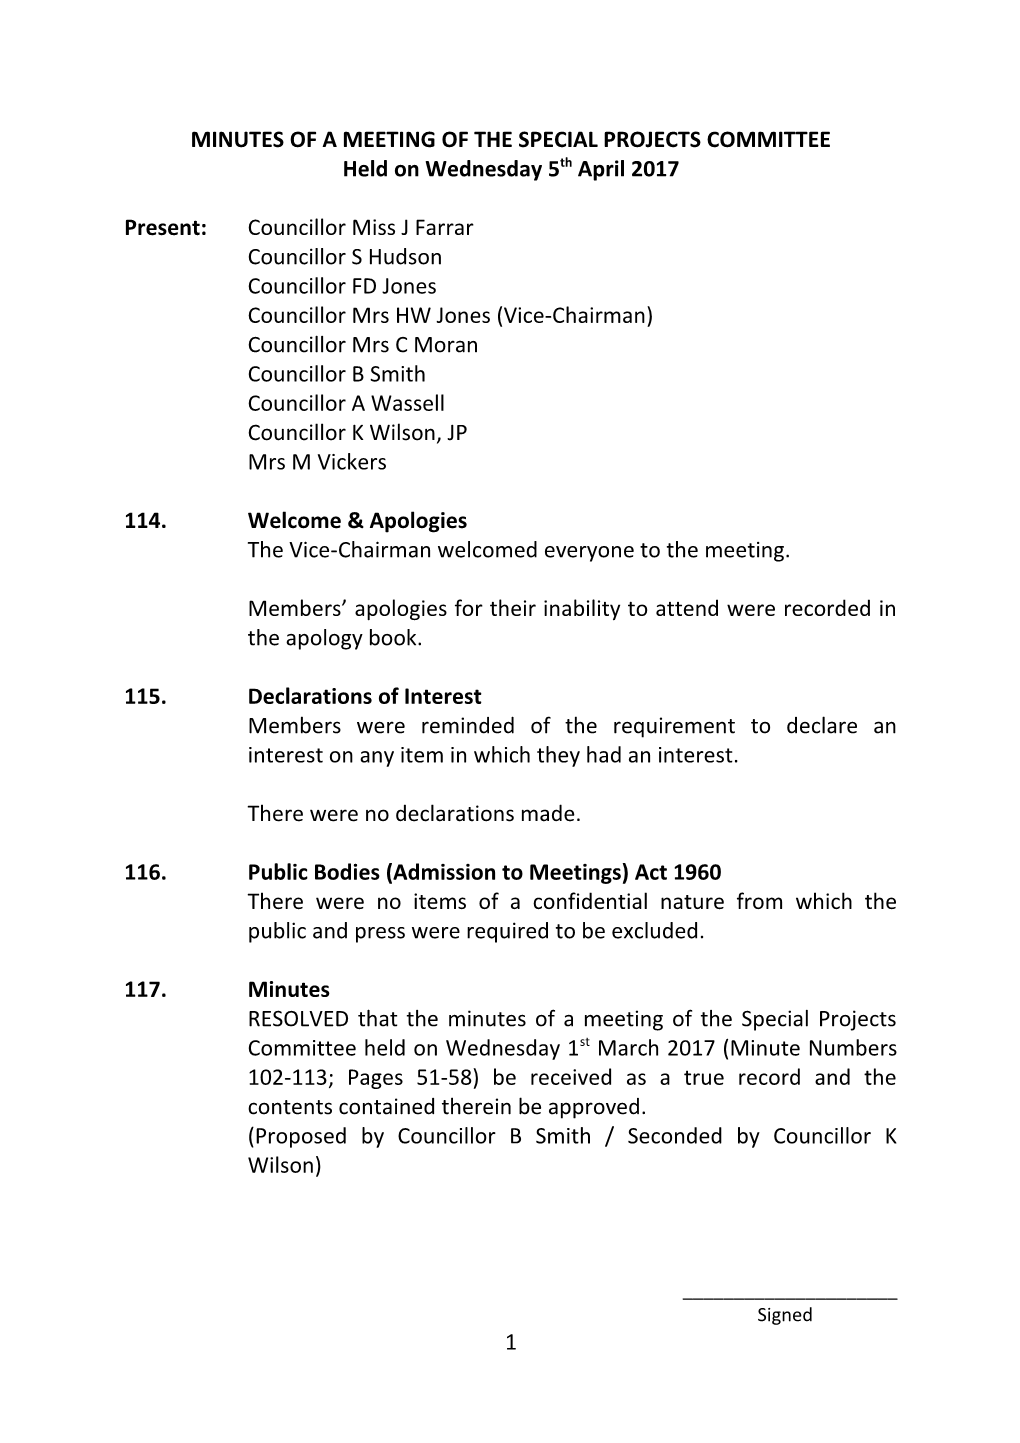 Minutes of a Meeting of the Special Projects Committee